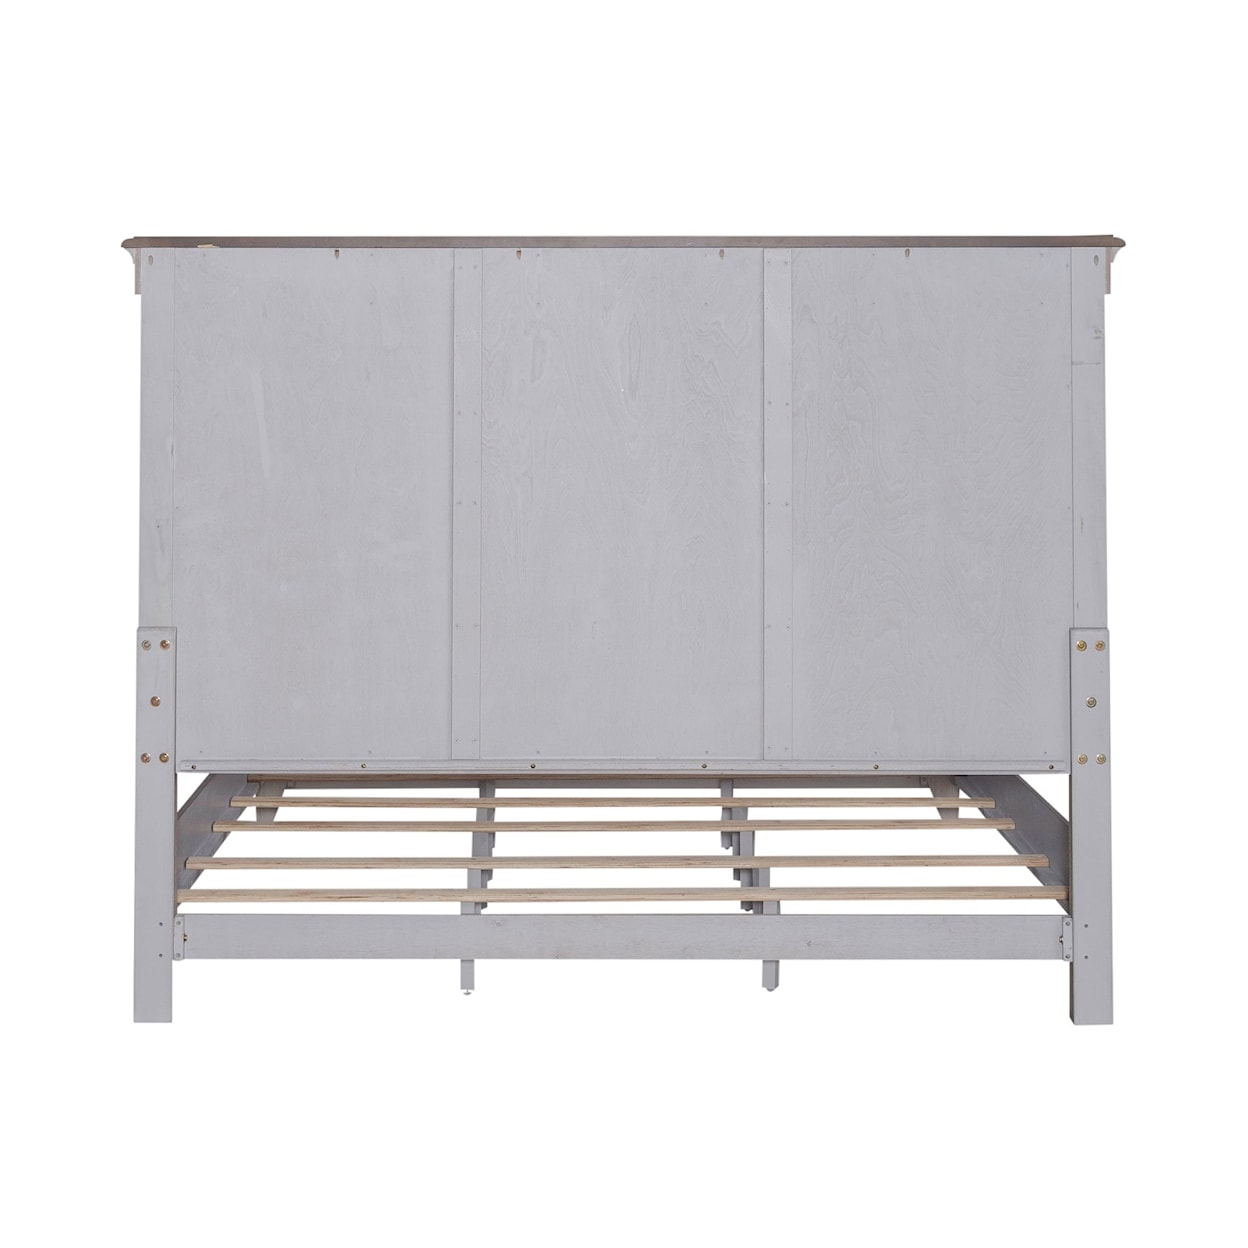 Liberty Furniture Ivy Hollow King Panel Bed